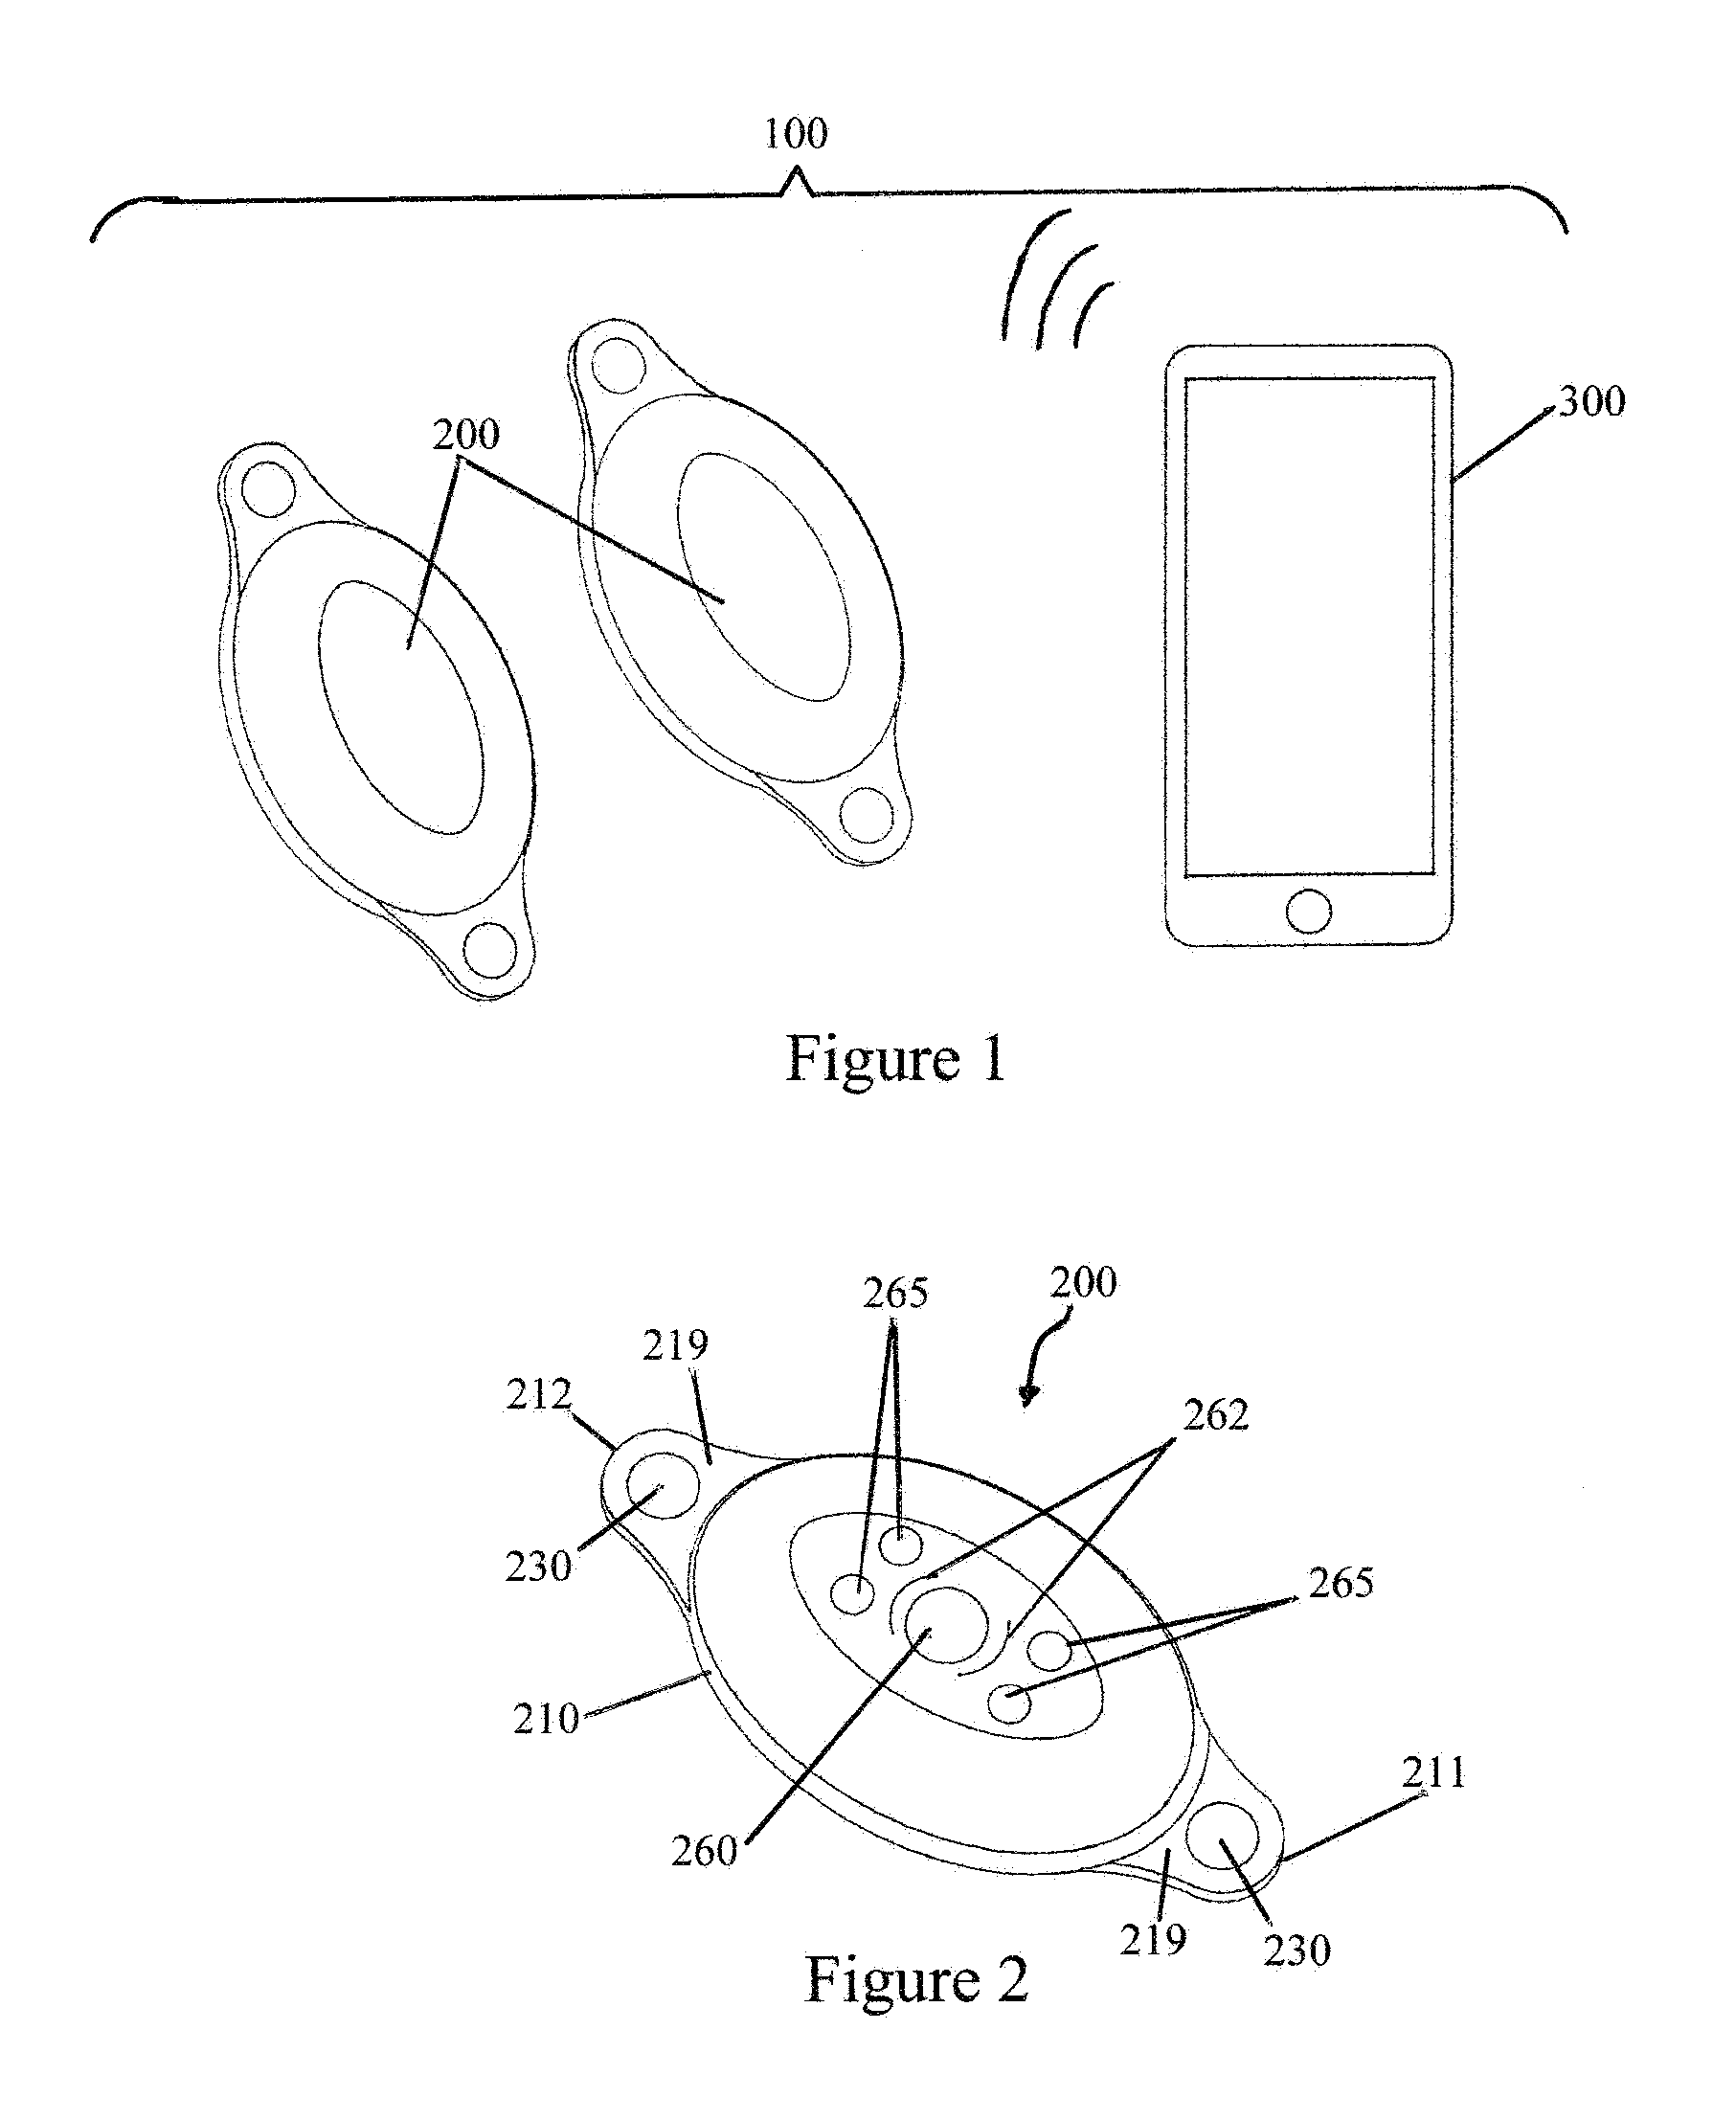 Methods and Devices for Treating Hypertension